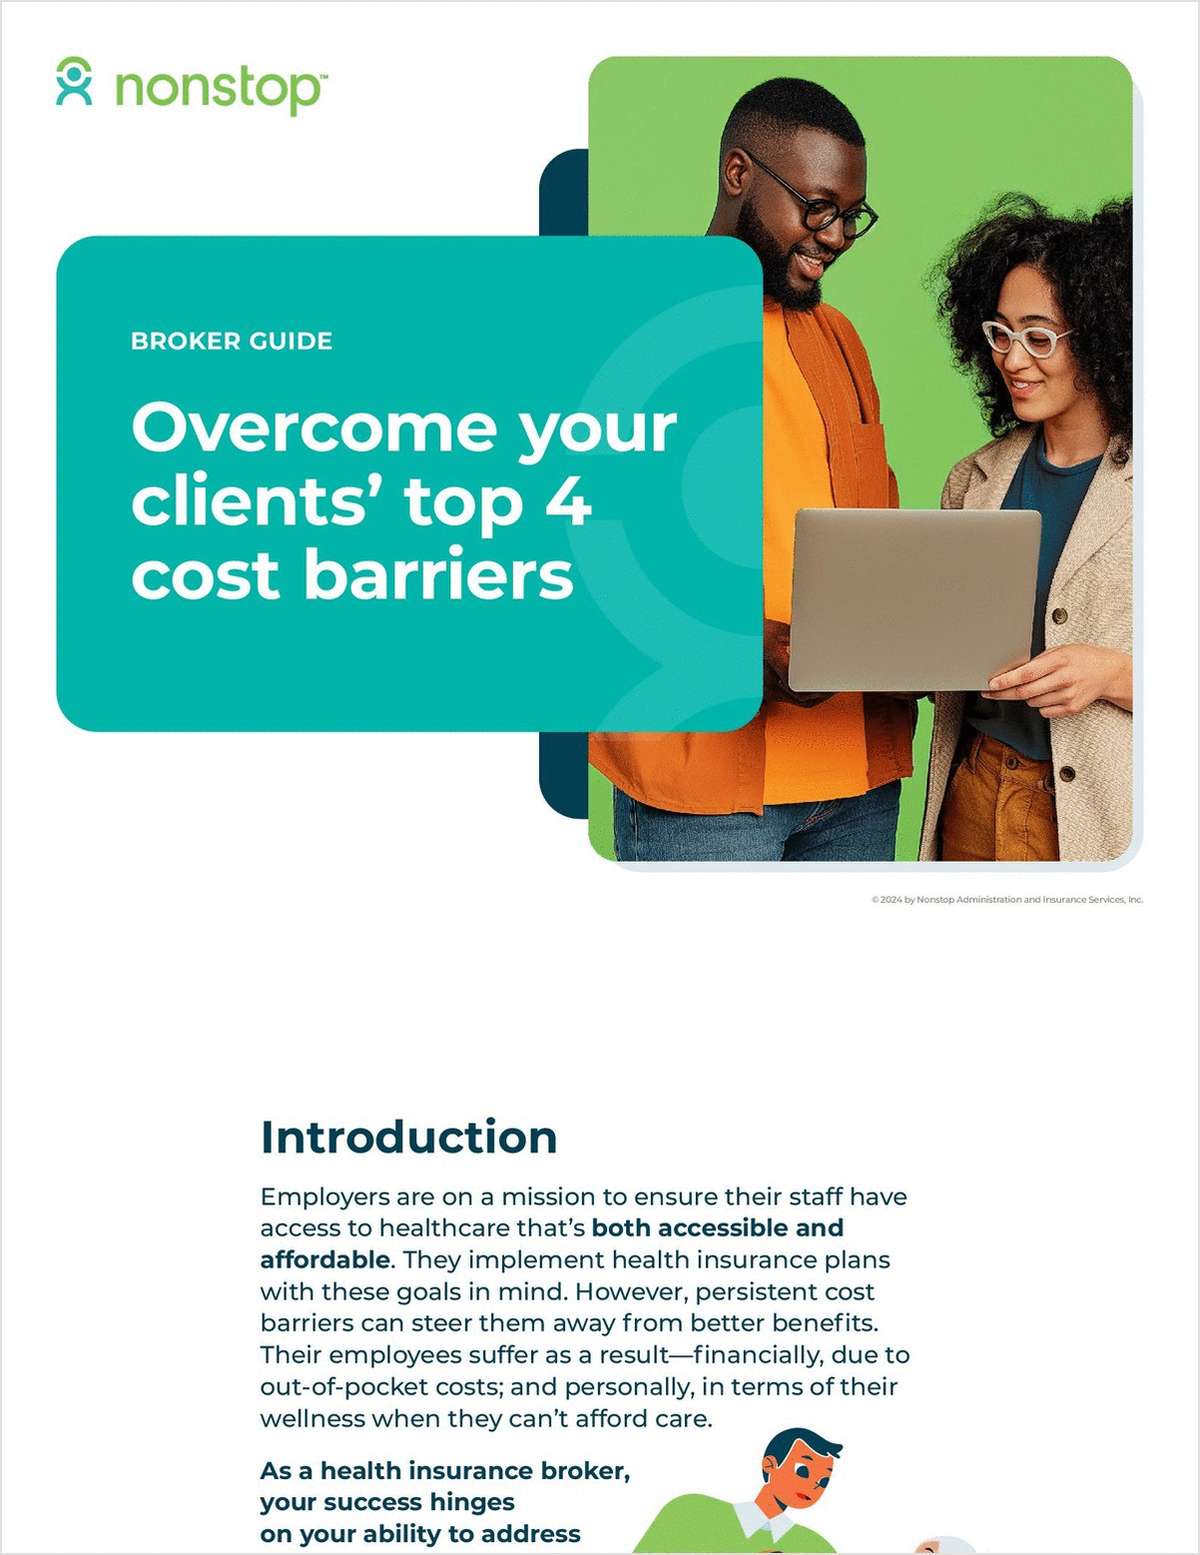 Broker Guide: Overcome Your Clients' Top 4 Cost Barriers link